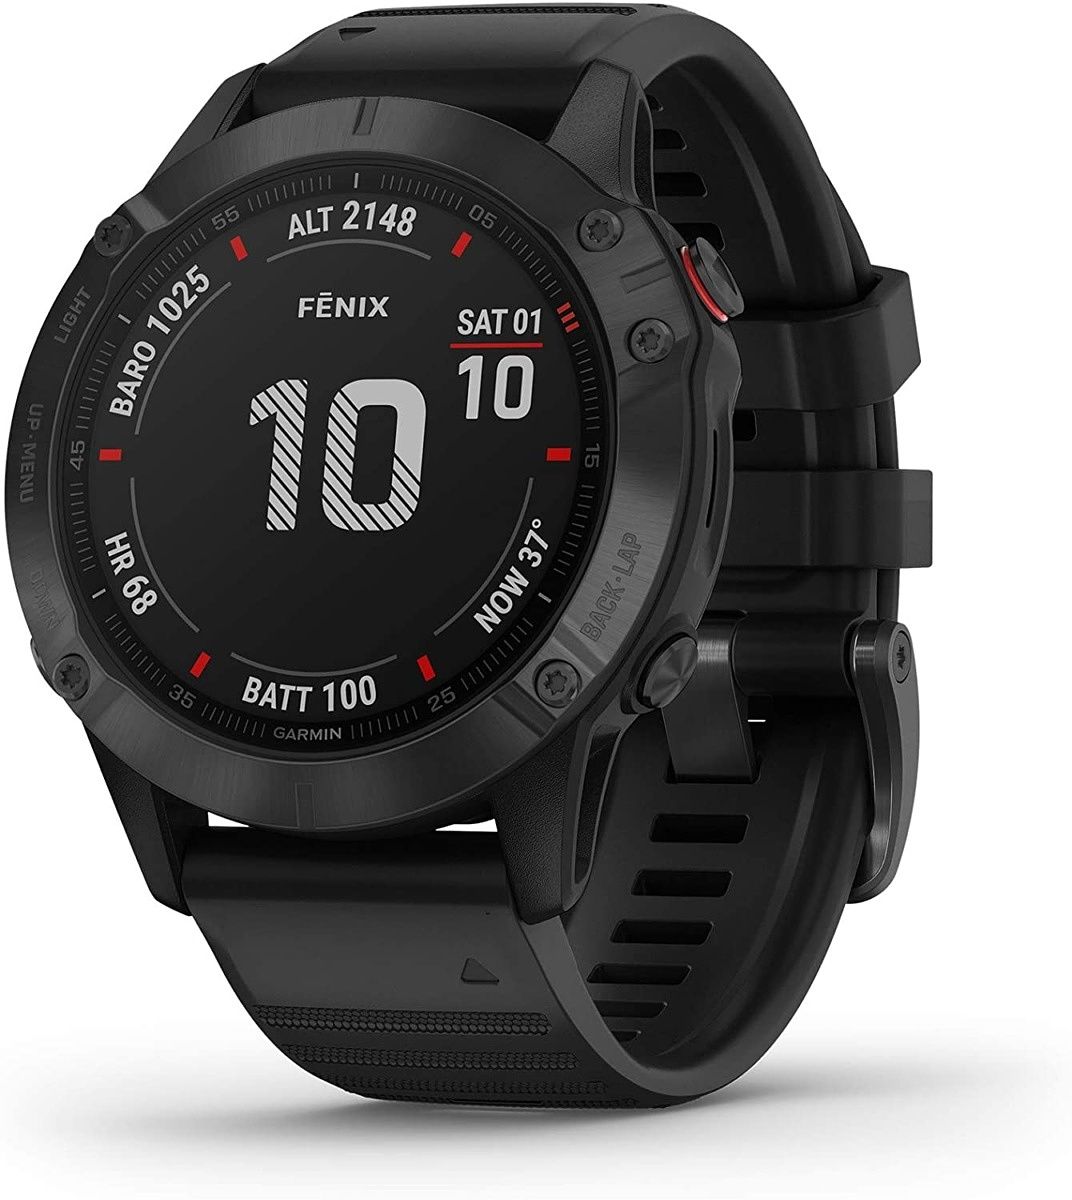 The Garmin Fenix ​​6 Pro is one of the best premium smartwatches out there, with military certification, fitness tracking, and more.